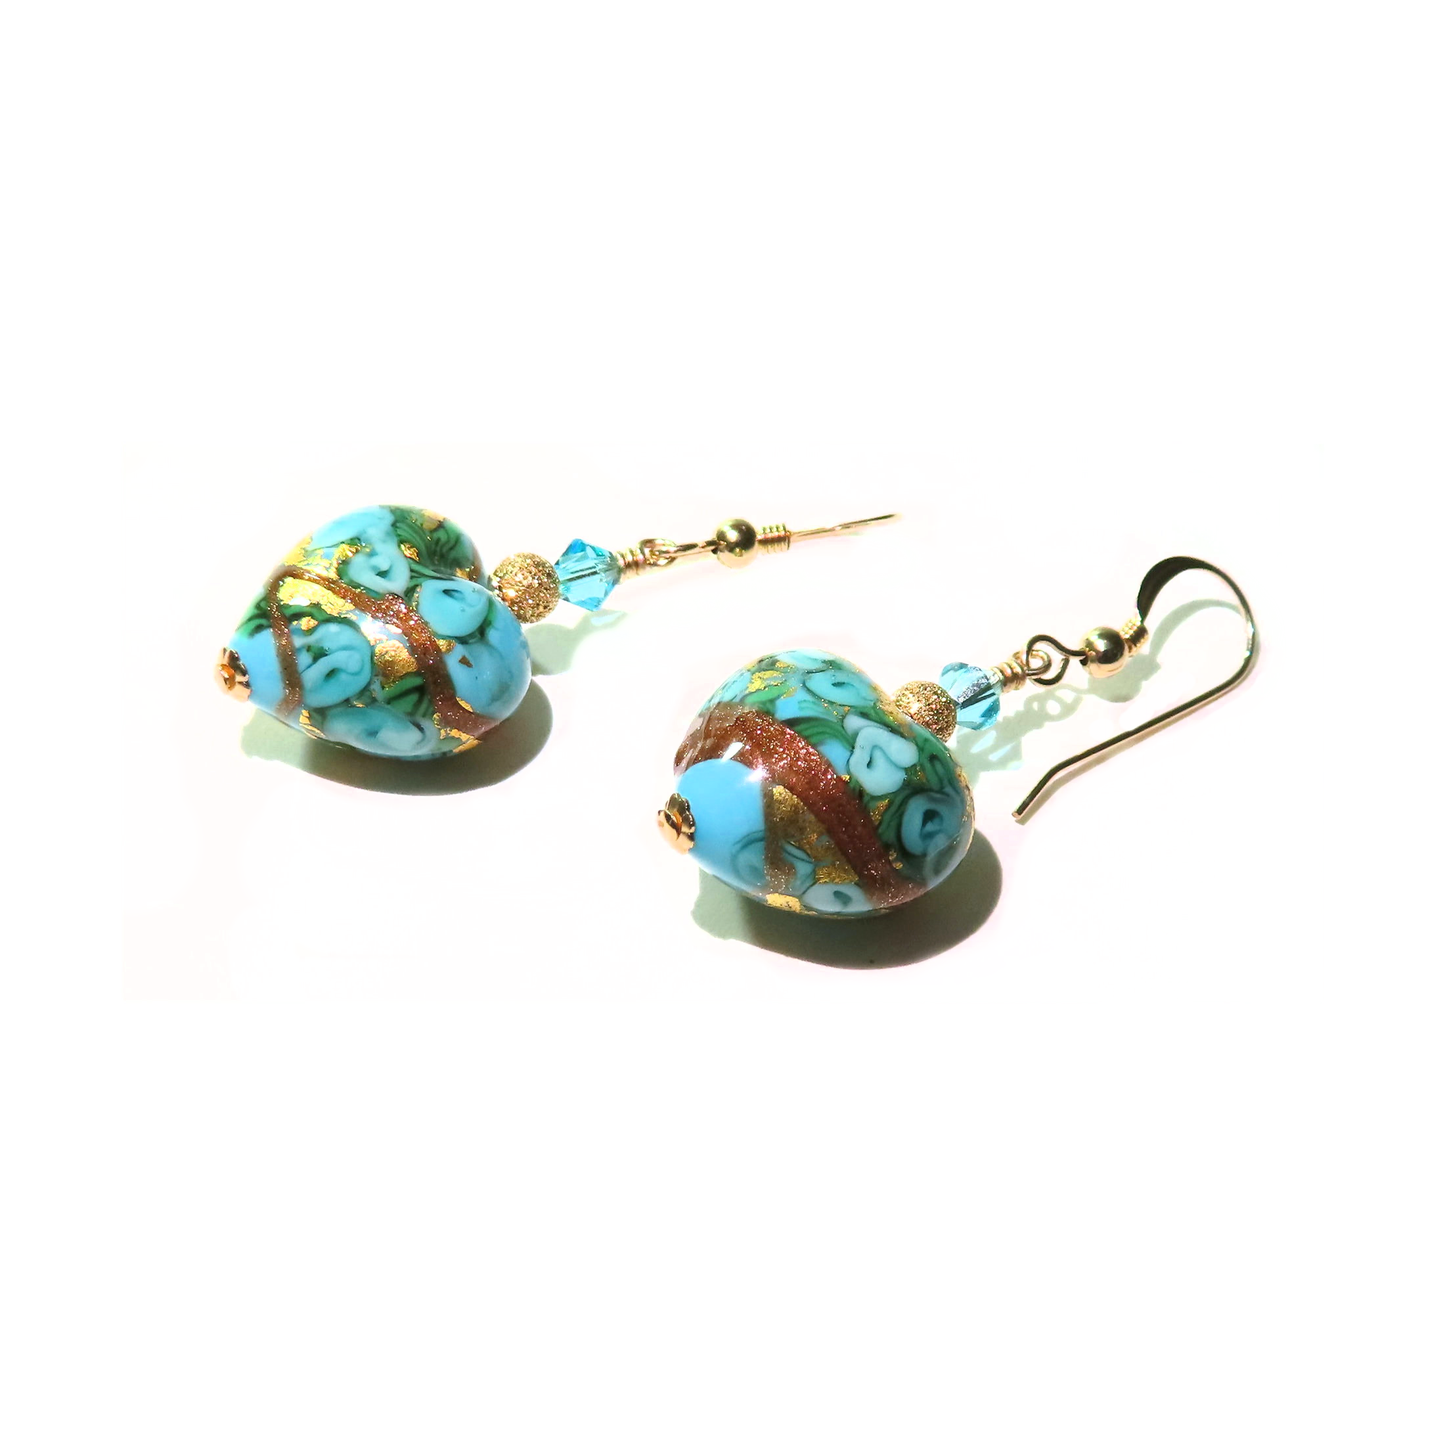 a pair of earrings with turquoise heart beads